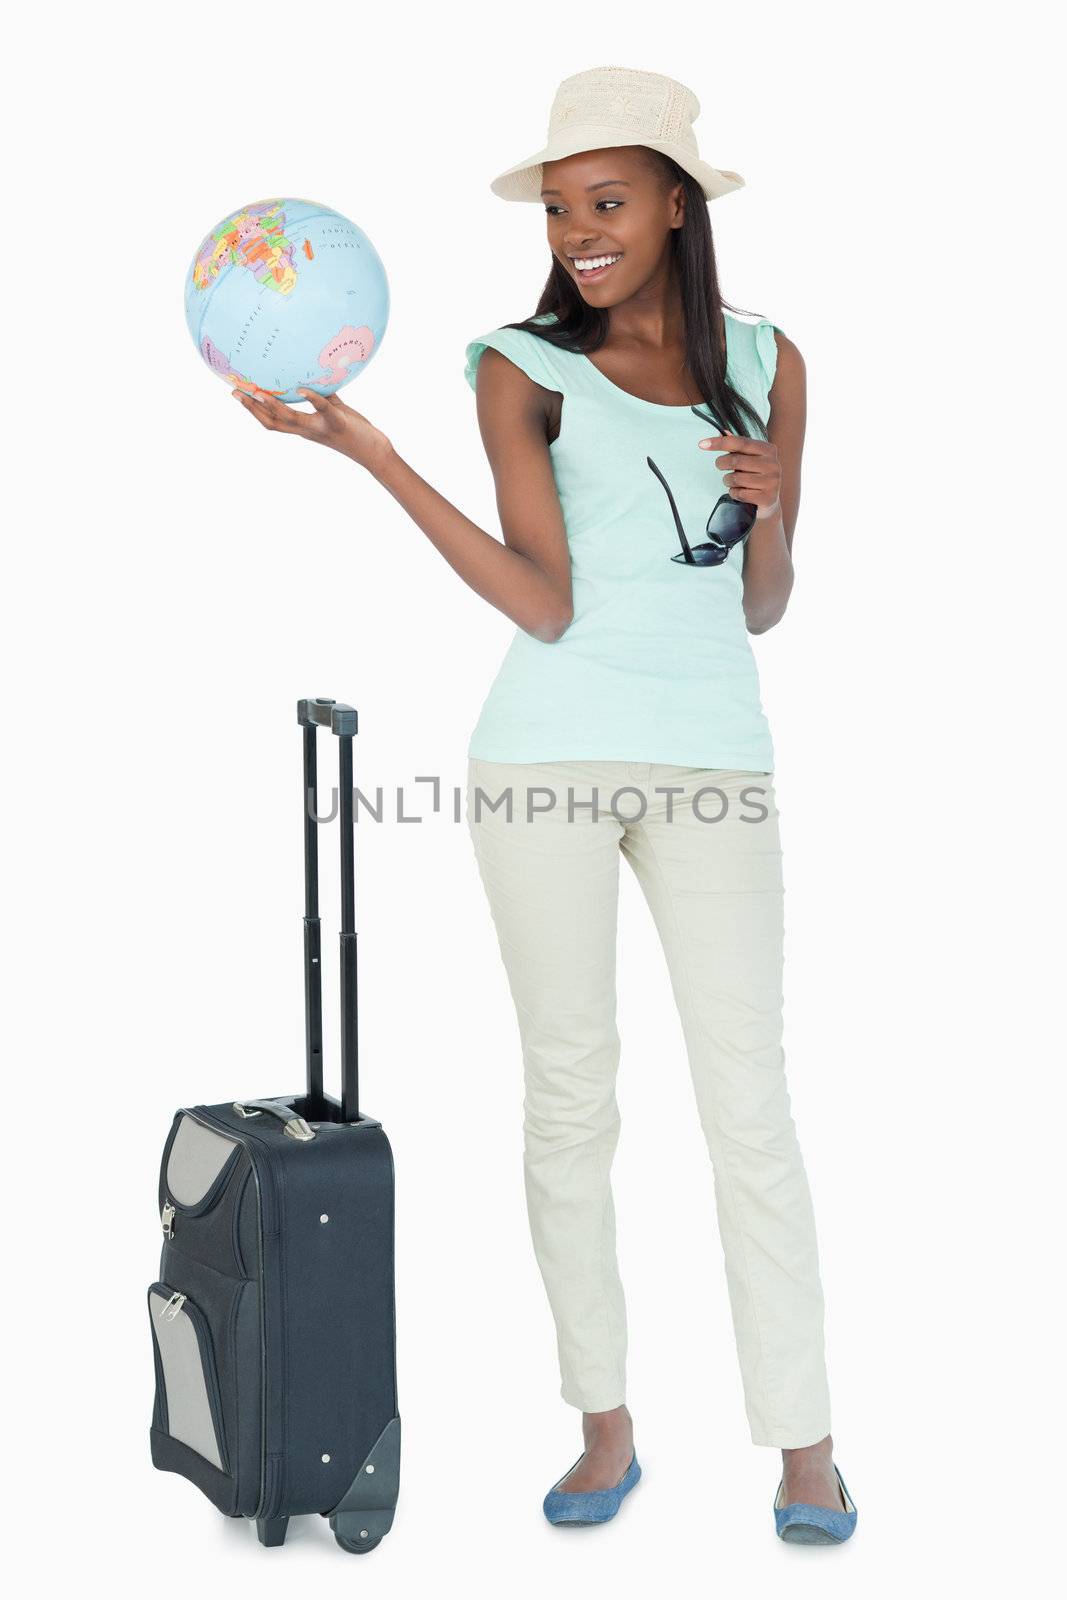 Young woman ready to travel the world by Wavebreakmedia